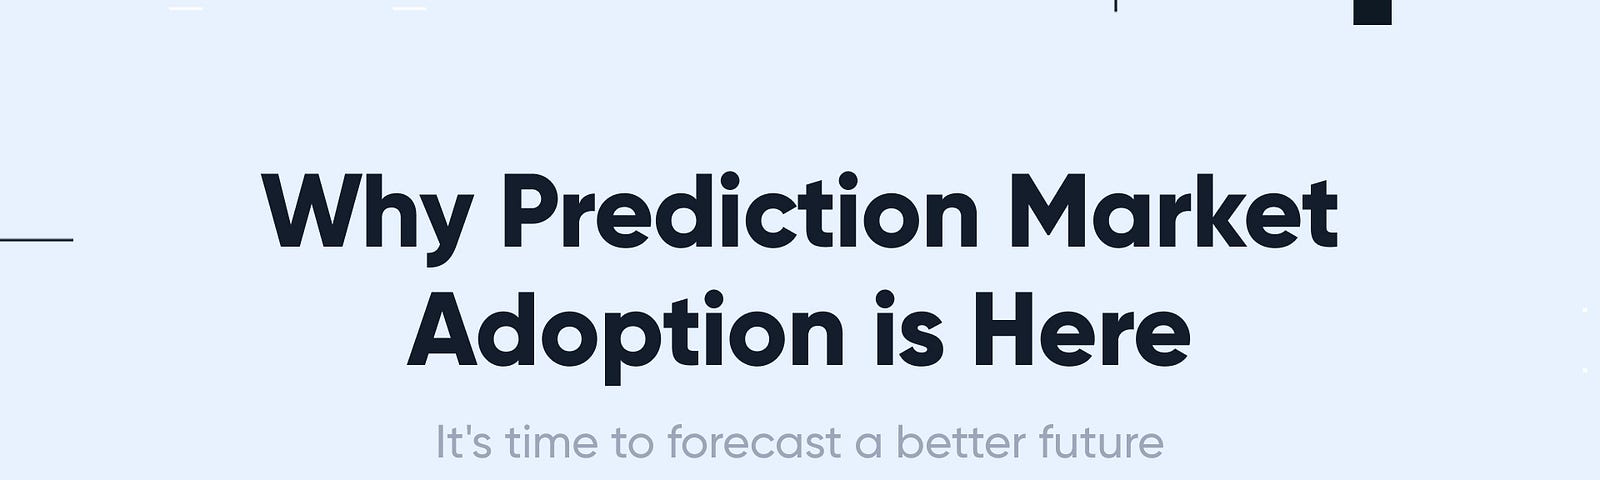 Why Prediction Market Adoption is Here. It’s time to forecast a better future